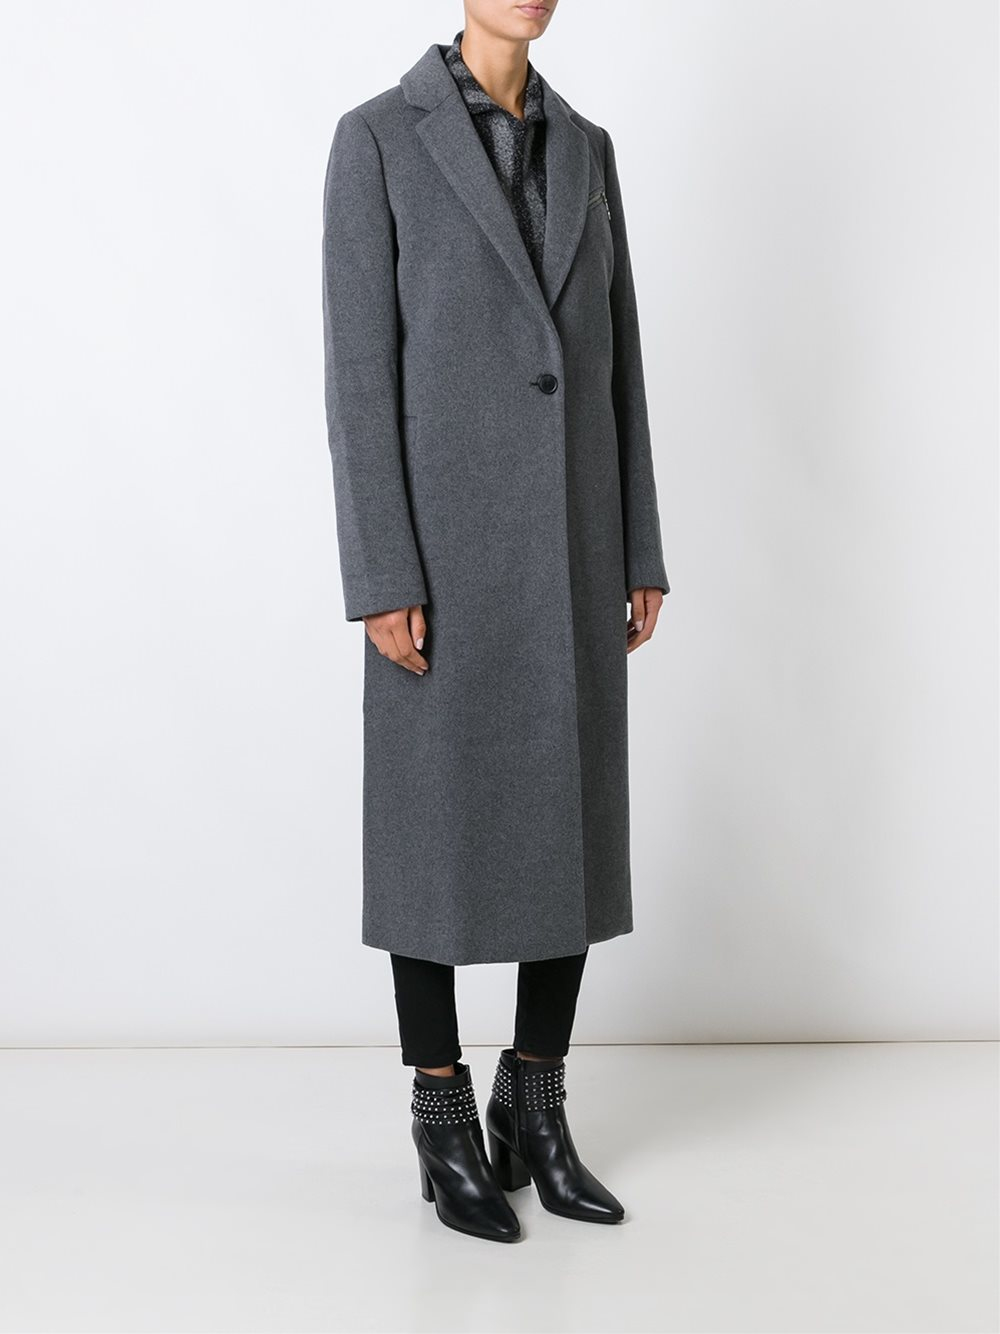 Lyst - T By Alexander Wang Single Breasted Coat in Gray